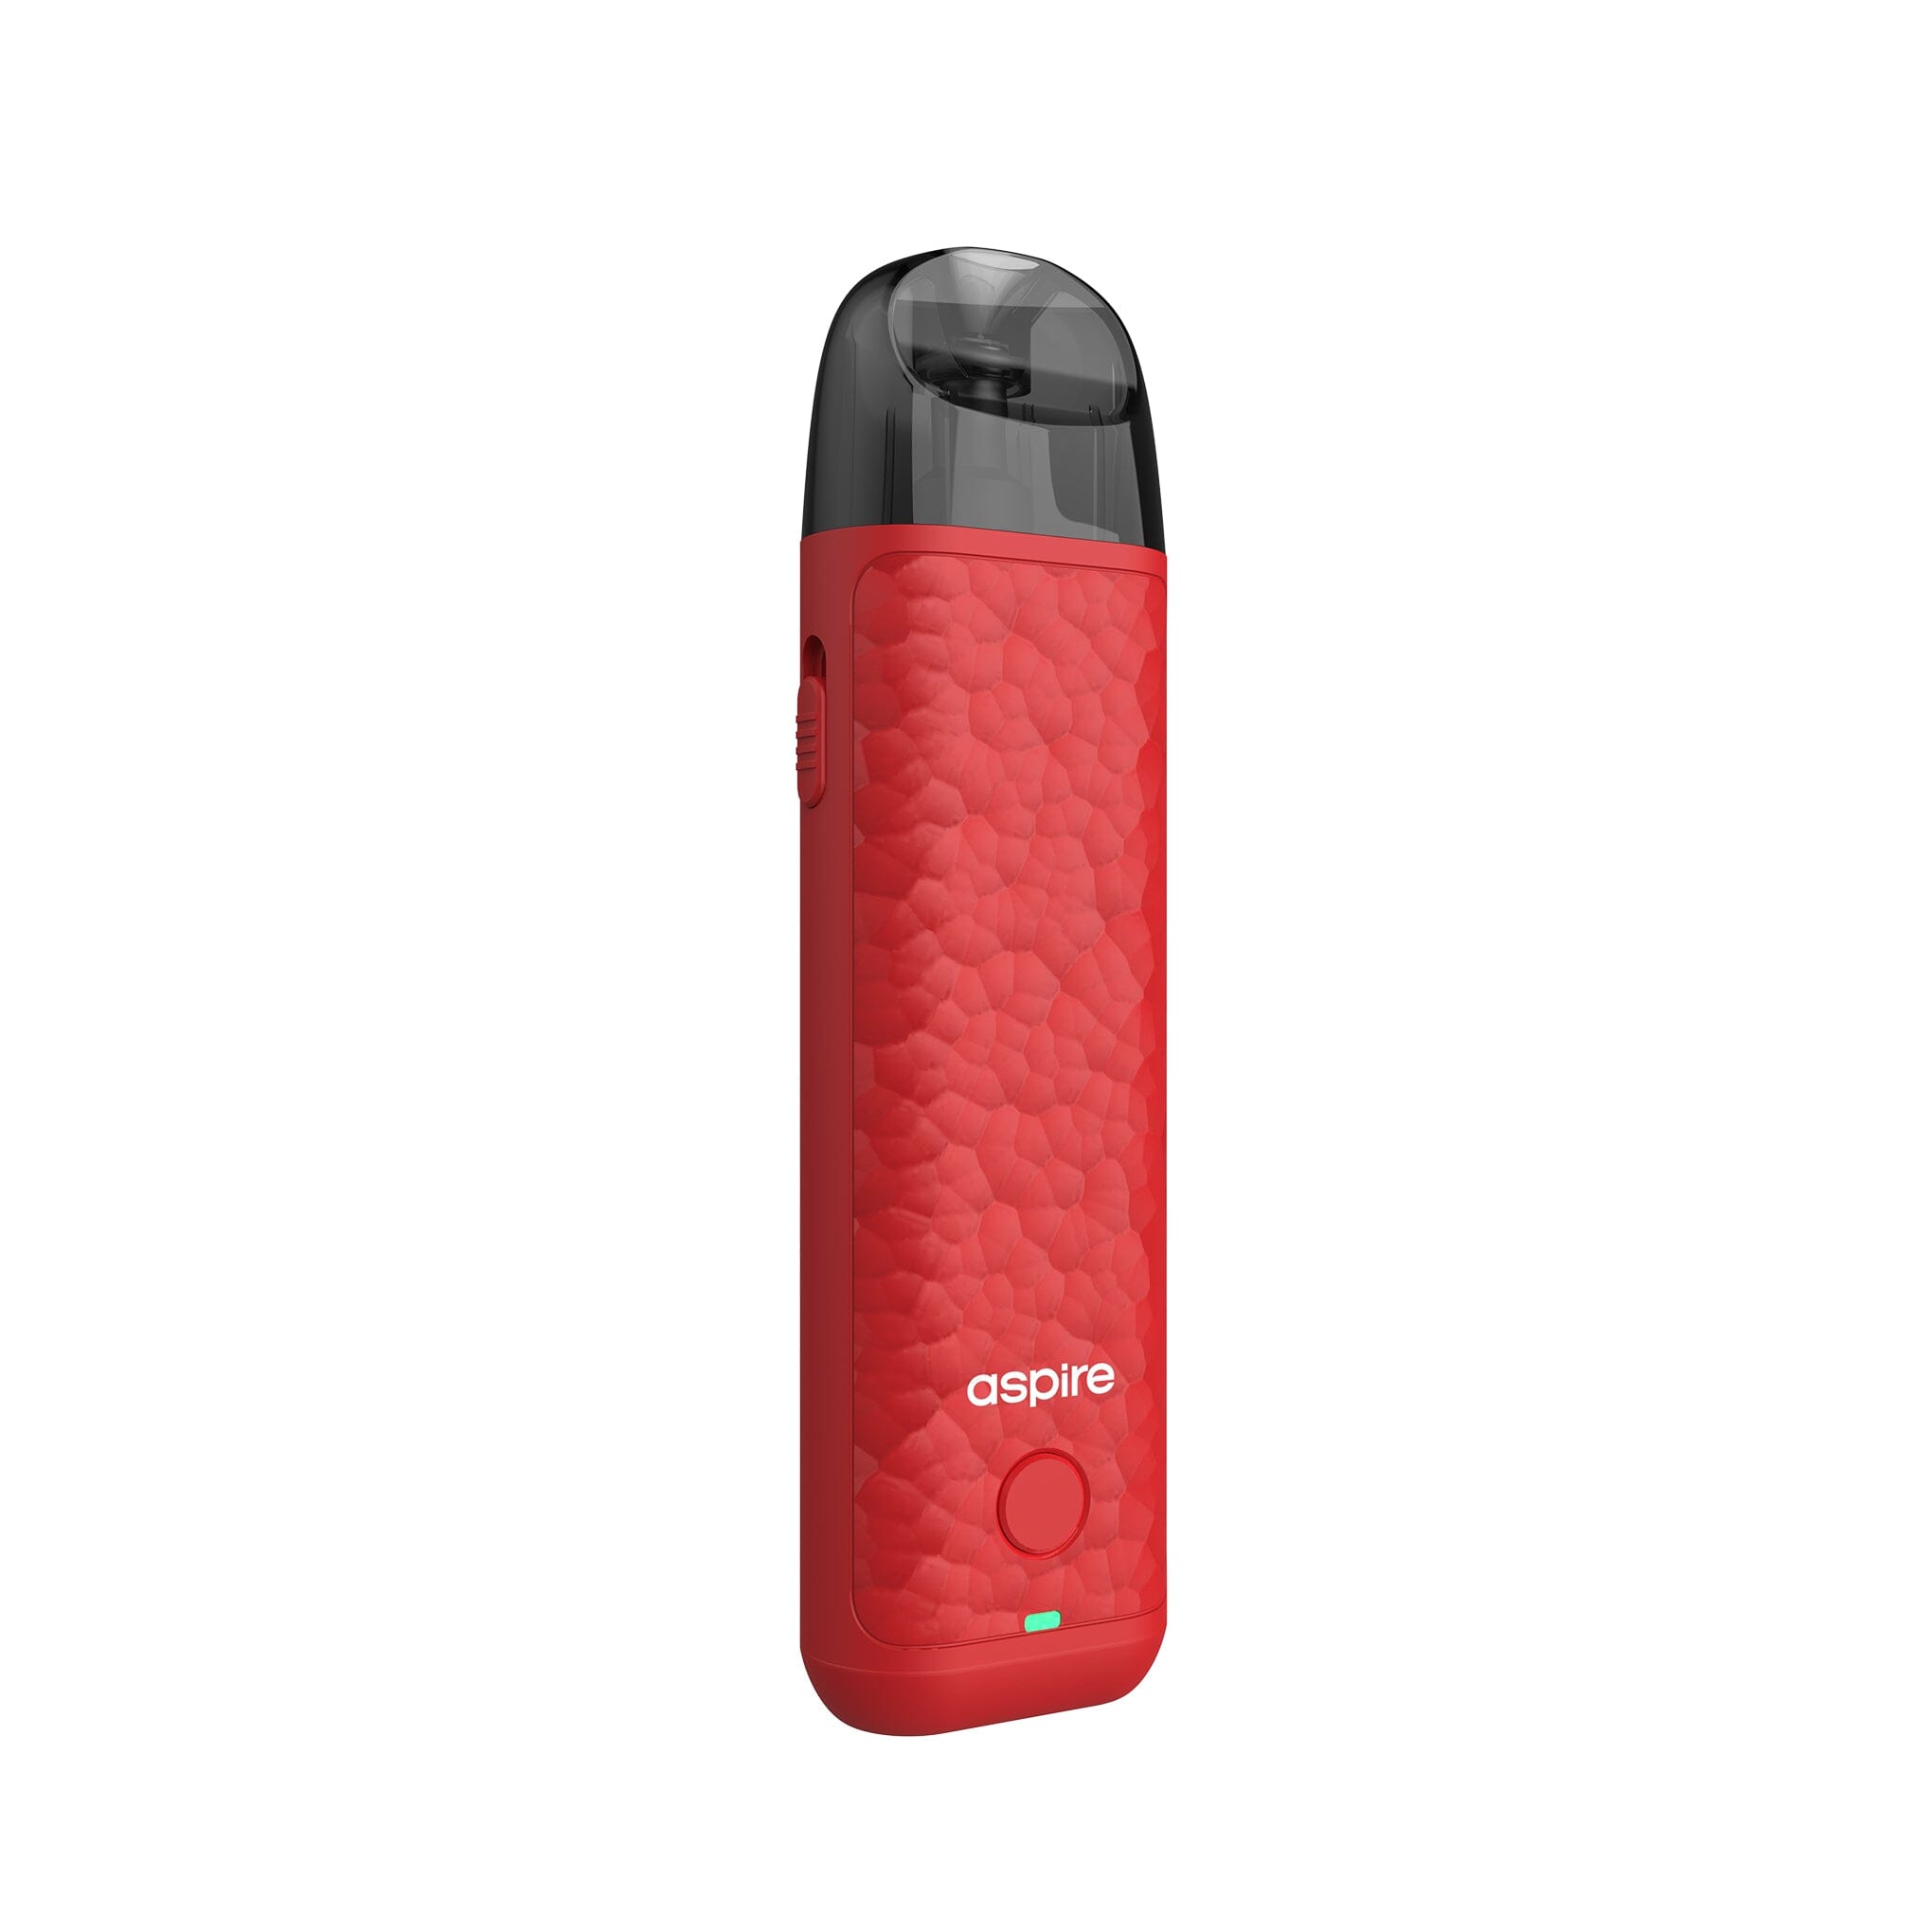 Aspire Minican 4 Kit Red 